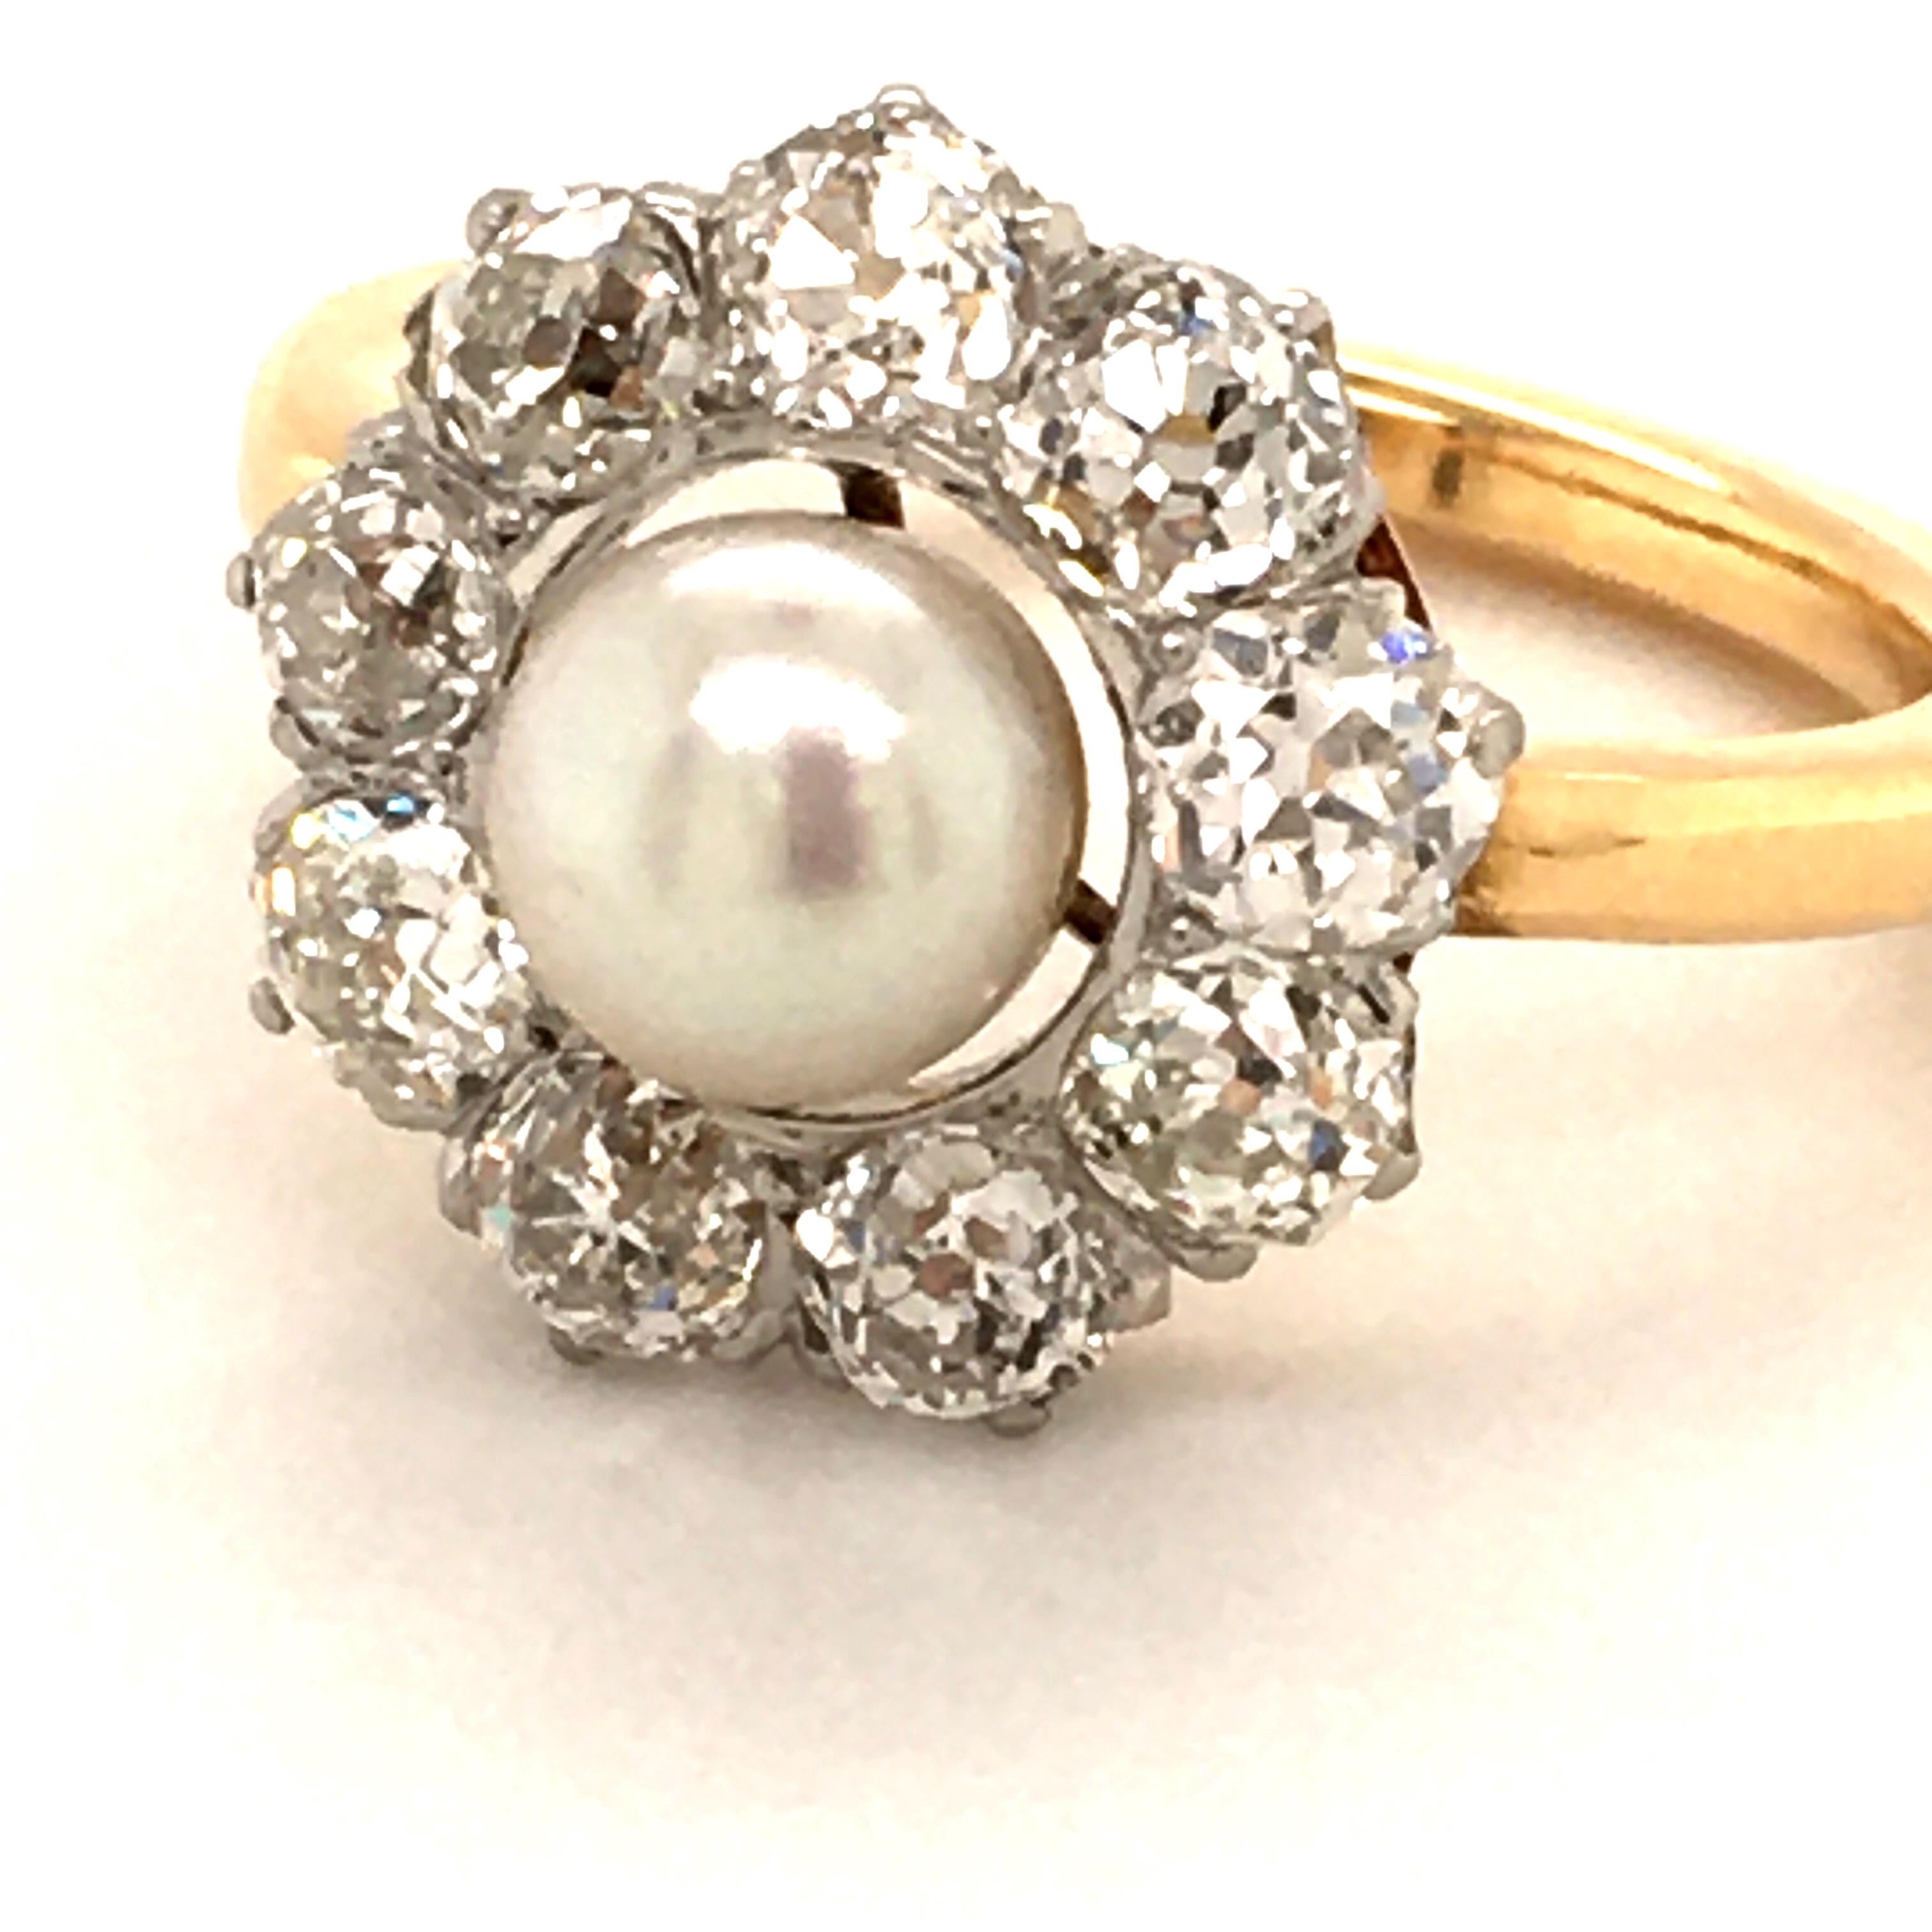 Charming Natural Pearl Ring in Yellow and Red Gold 750.
9 fine Oldcut Diamonds (G/H-si) set in White Gold, totaling 1.40 ct are surrounding the slightly cream-colored, boutton shaped, Natural Pearl with a beautiful luster.

Ring size: 56 / US 7.5